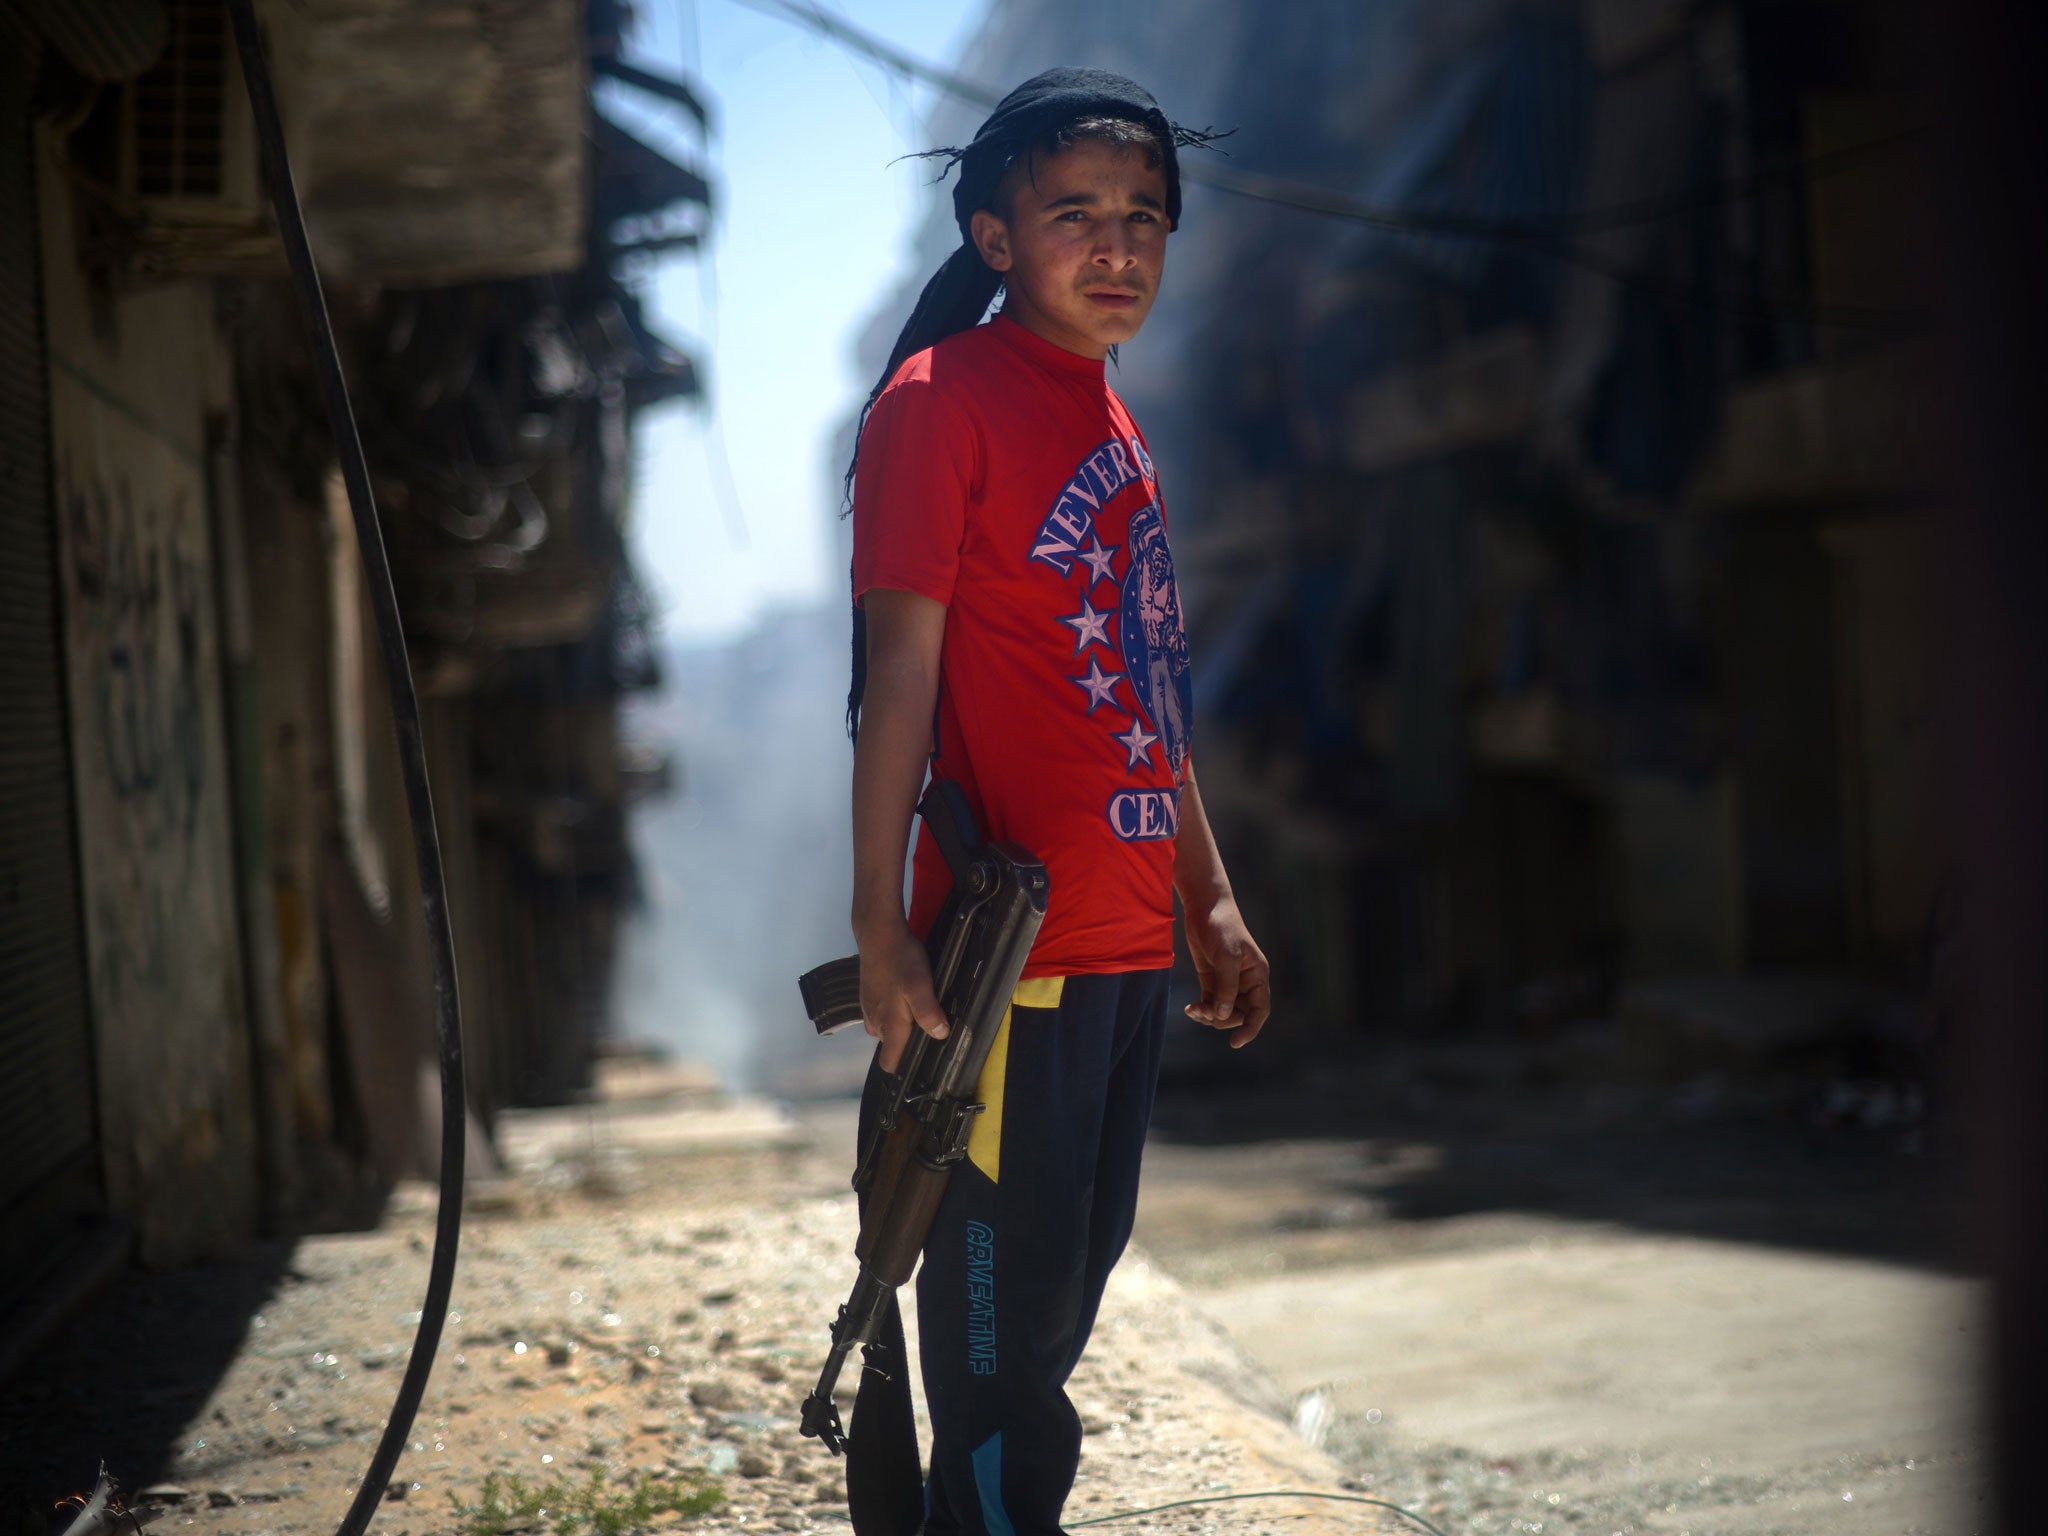 Street fighter: A youth with an AK-47 in the Kurdish district of Aleppo